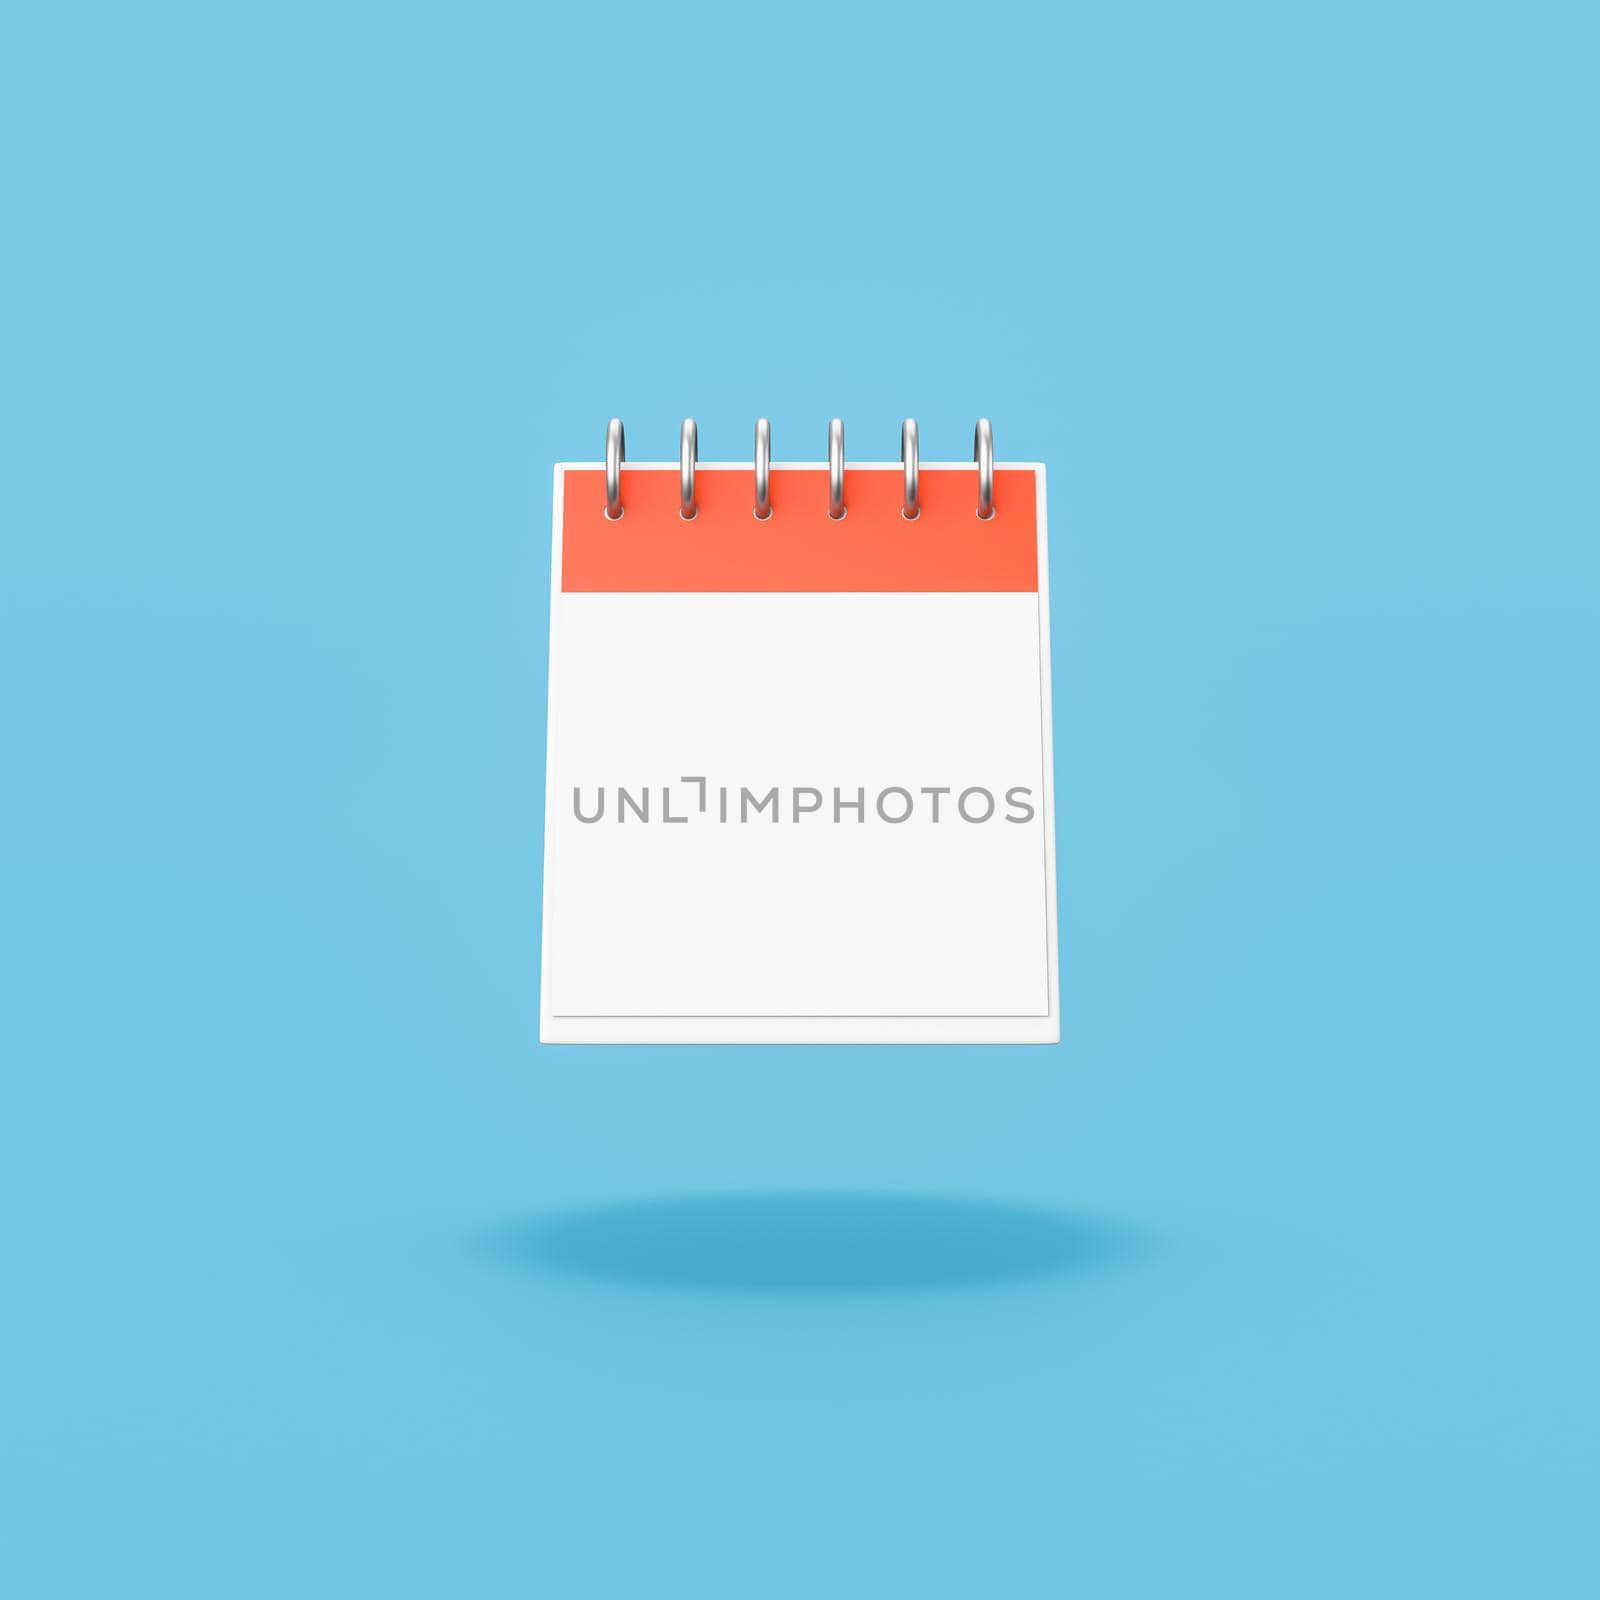 Orange and White Single Day Calendar with Blank Date on Flat Blue Background with Shadow 3D Illustration